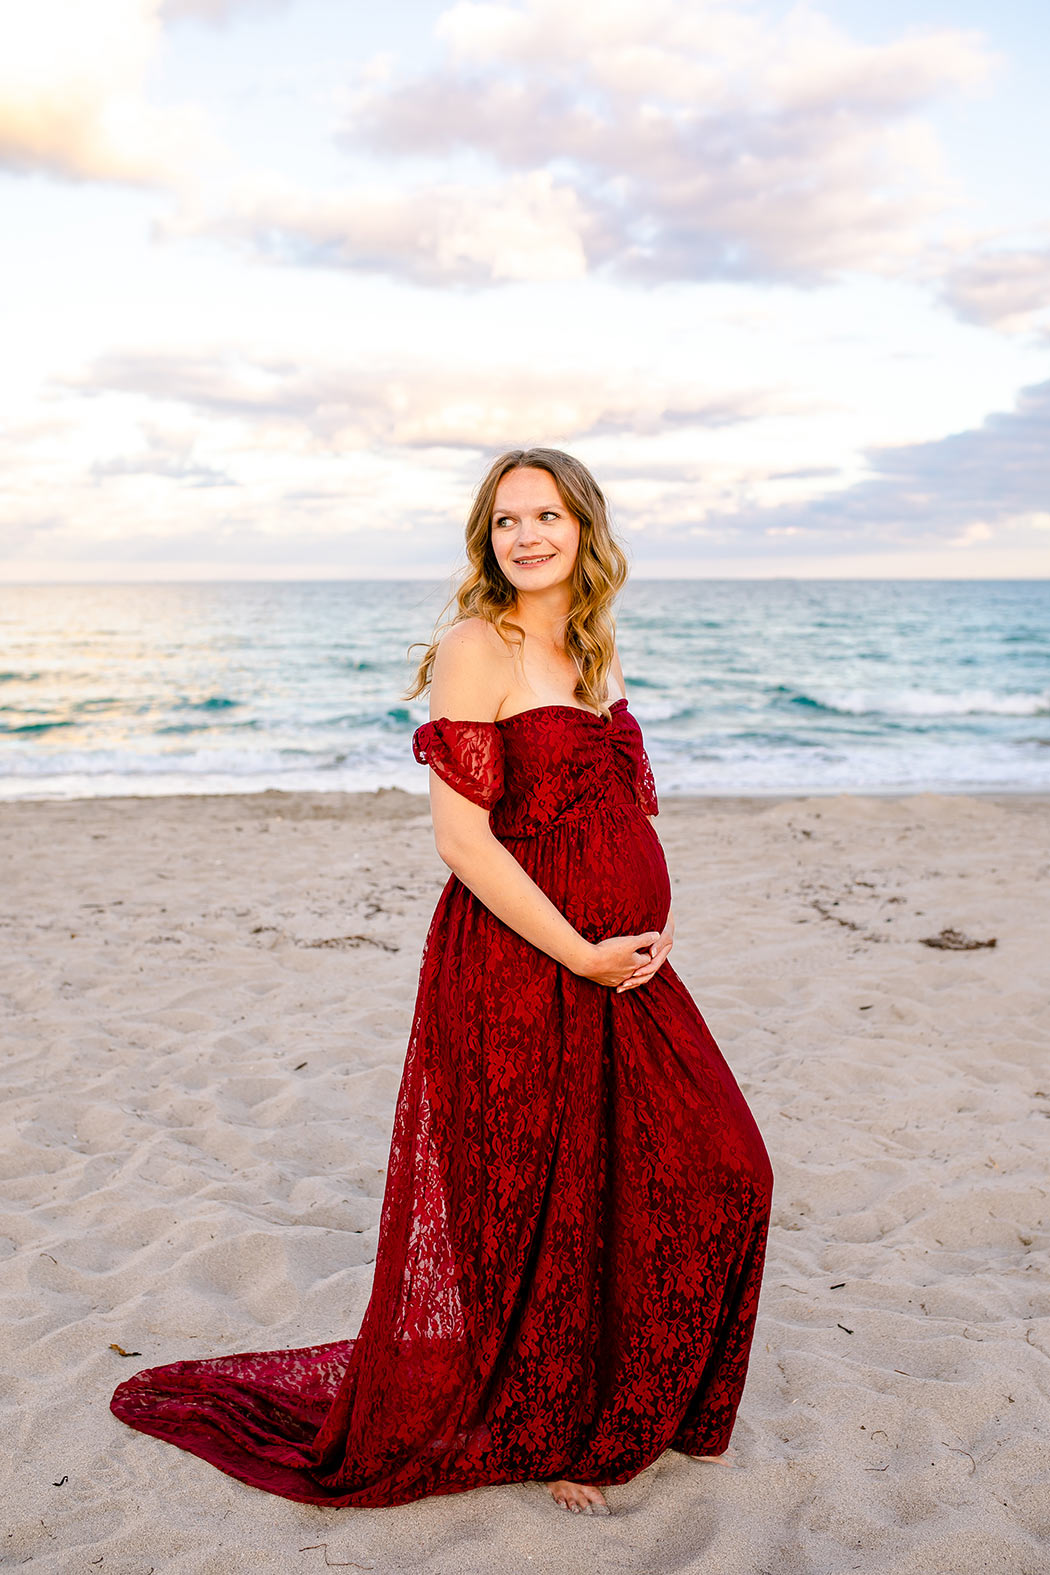 girl poses for beach maternity photos | expectant mother holds belly in photoshoot | maternity photographer south florida | maternity photography dania beach pier south florida